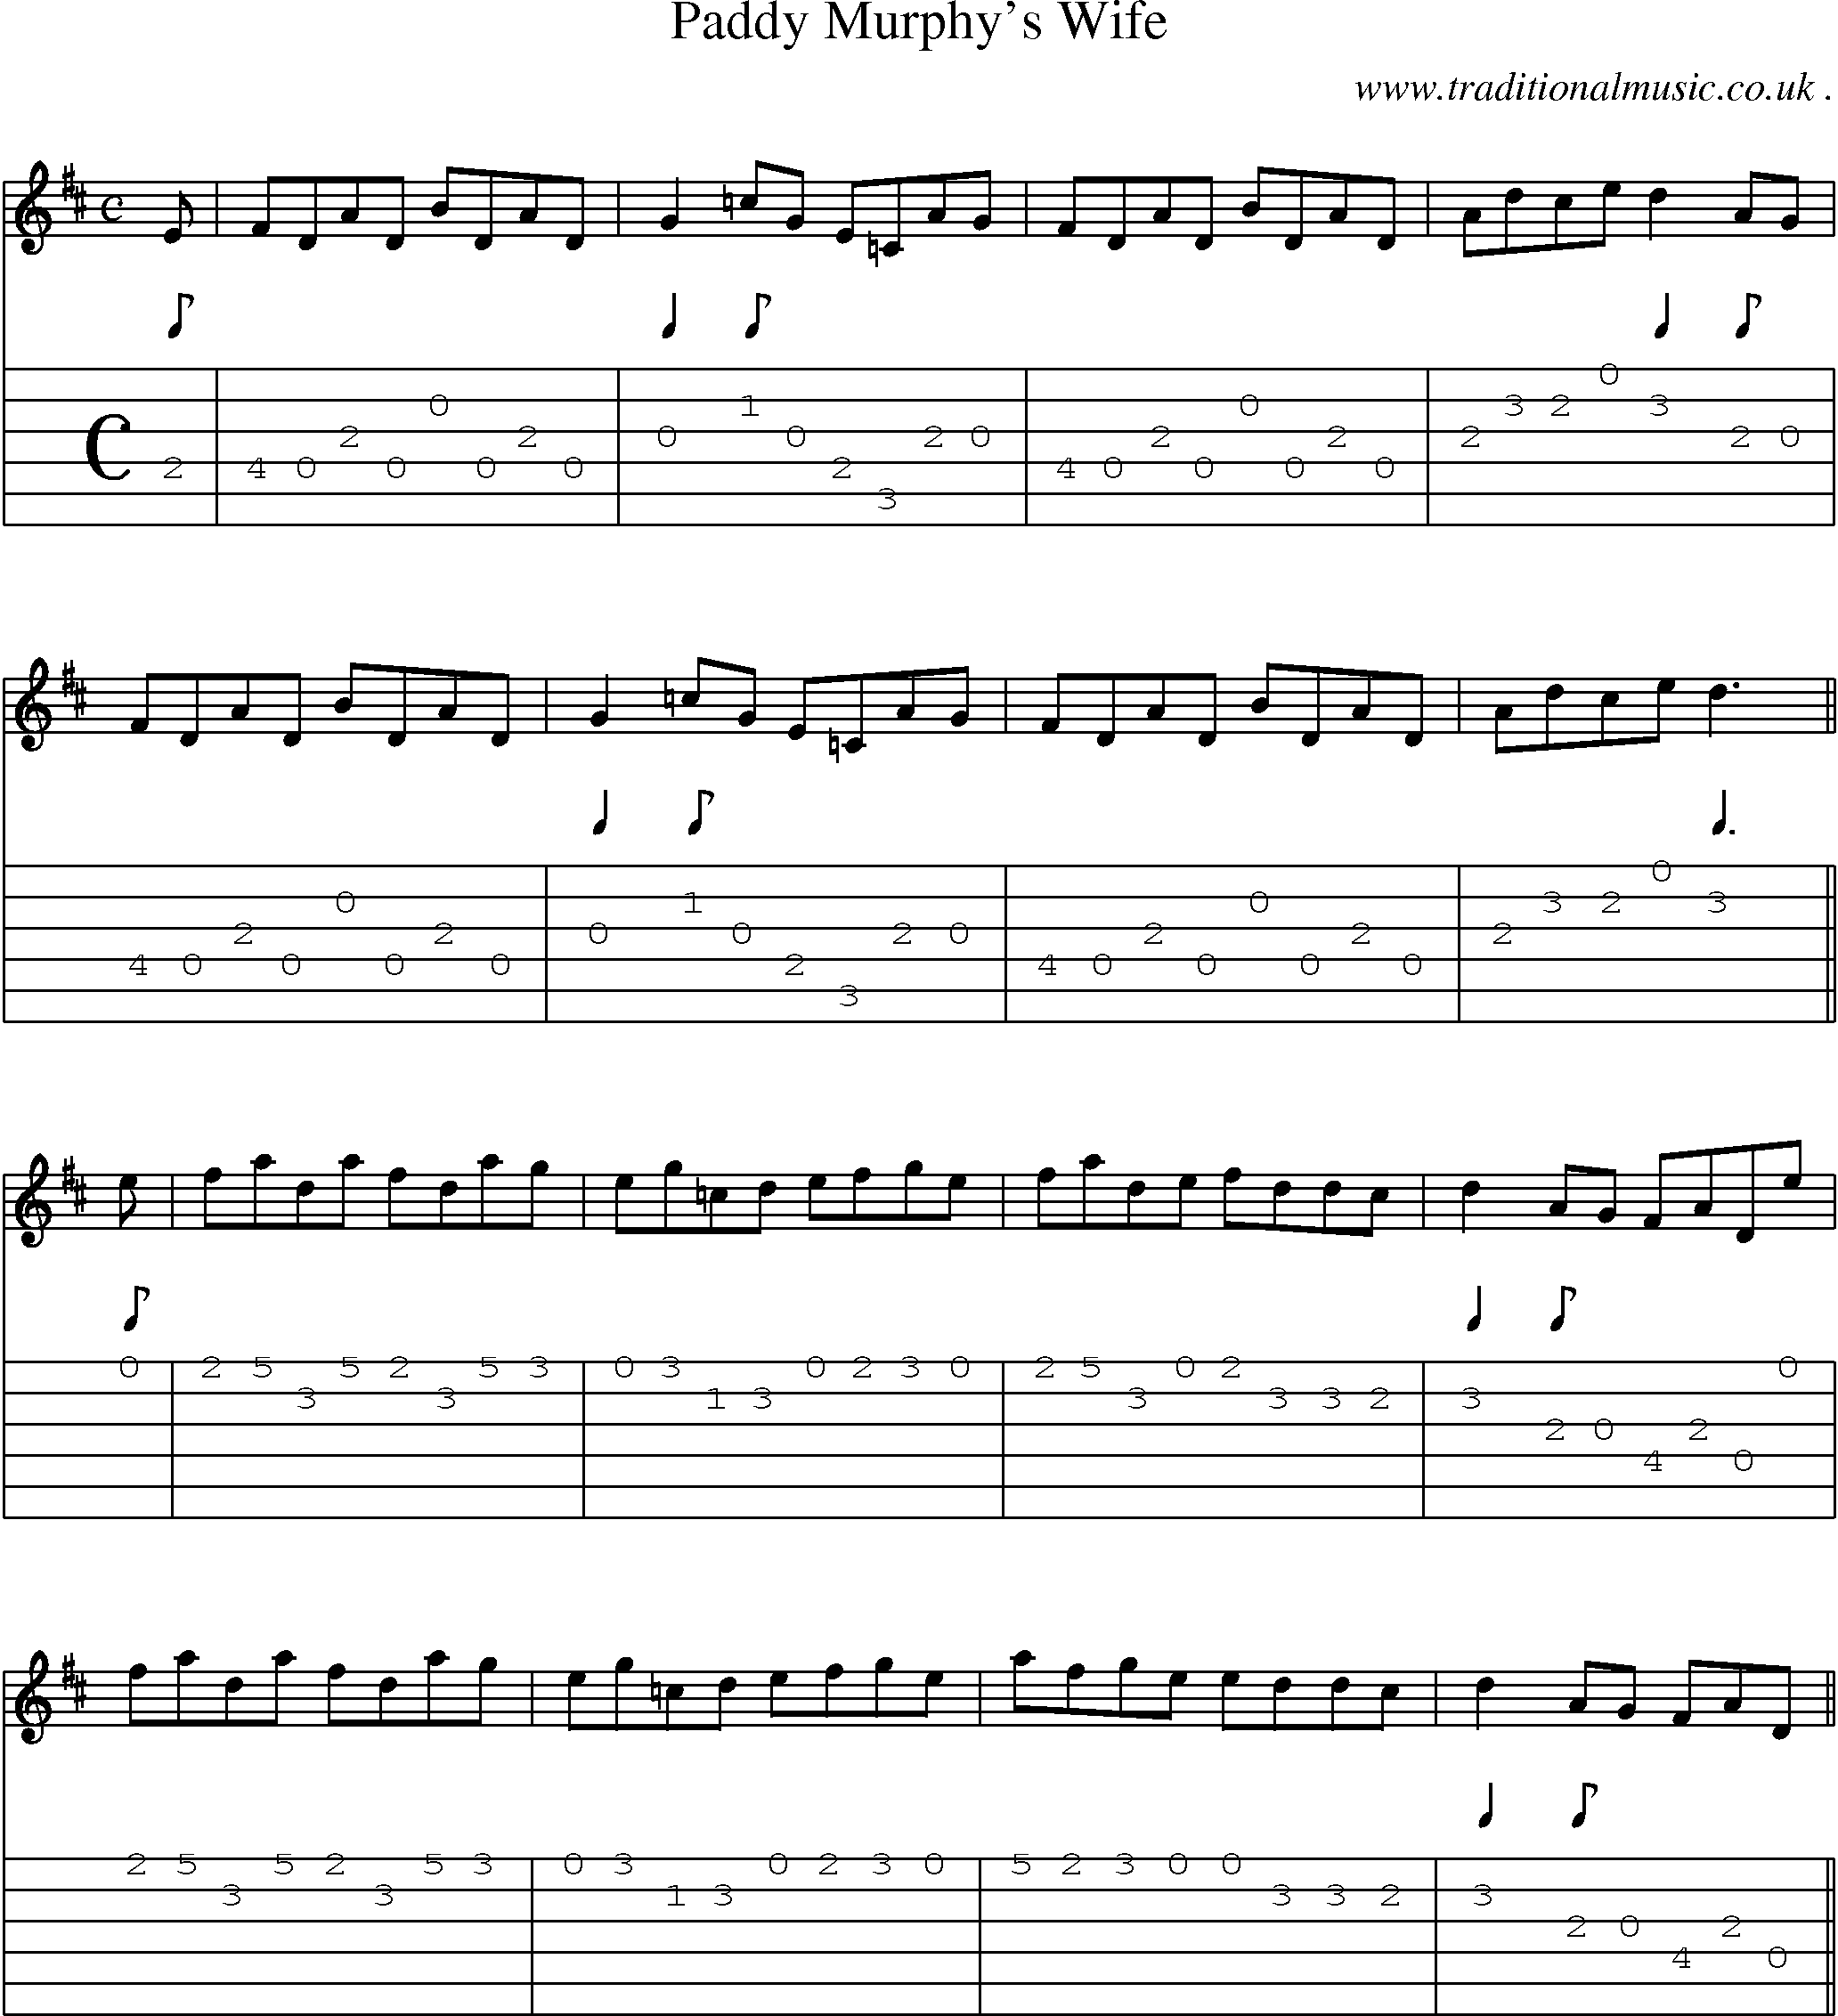 Sheet-Music and Guitar Tabs for Paddy Murphys Wife